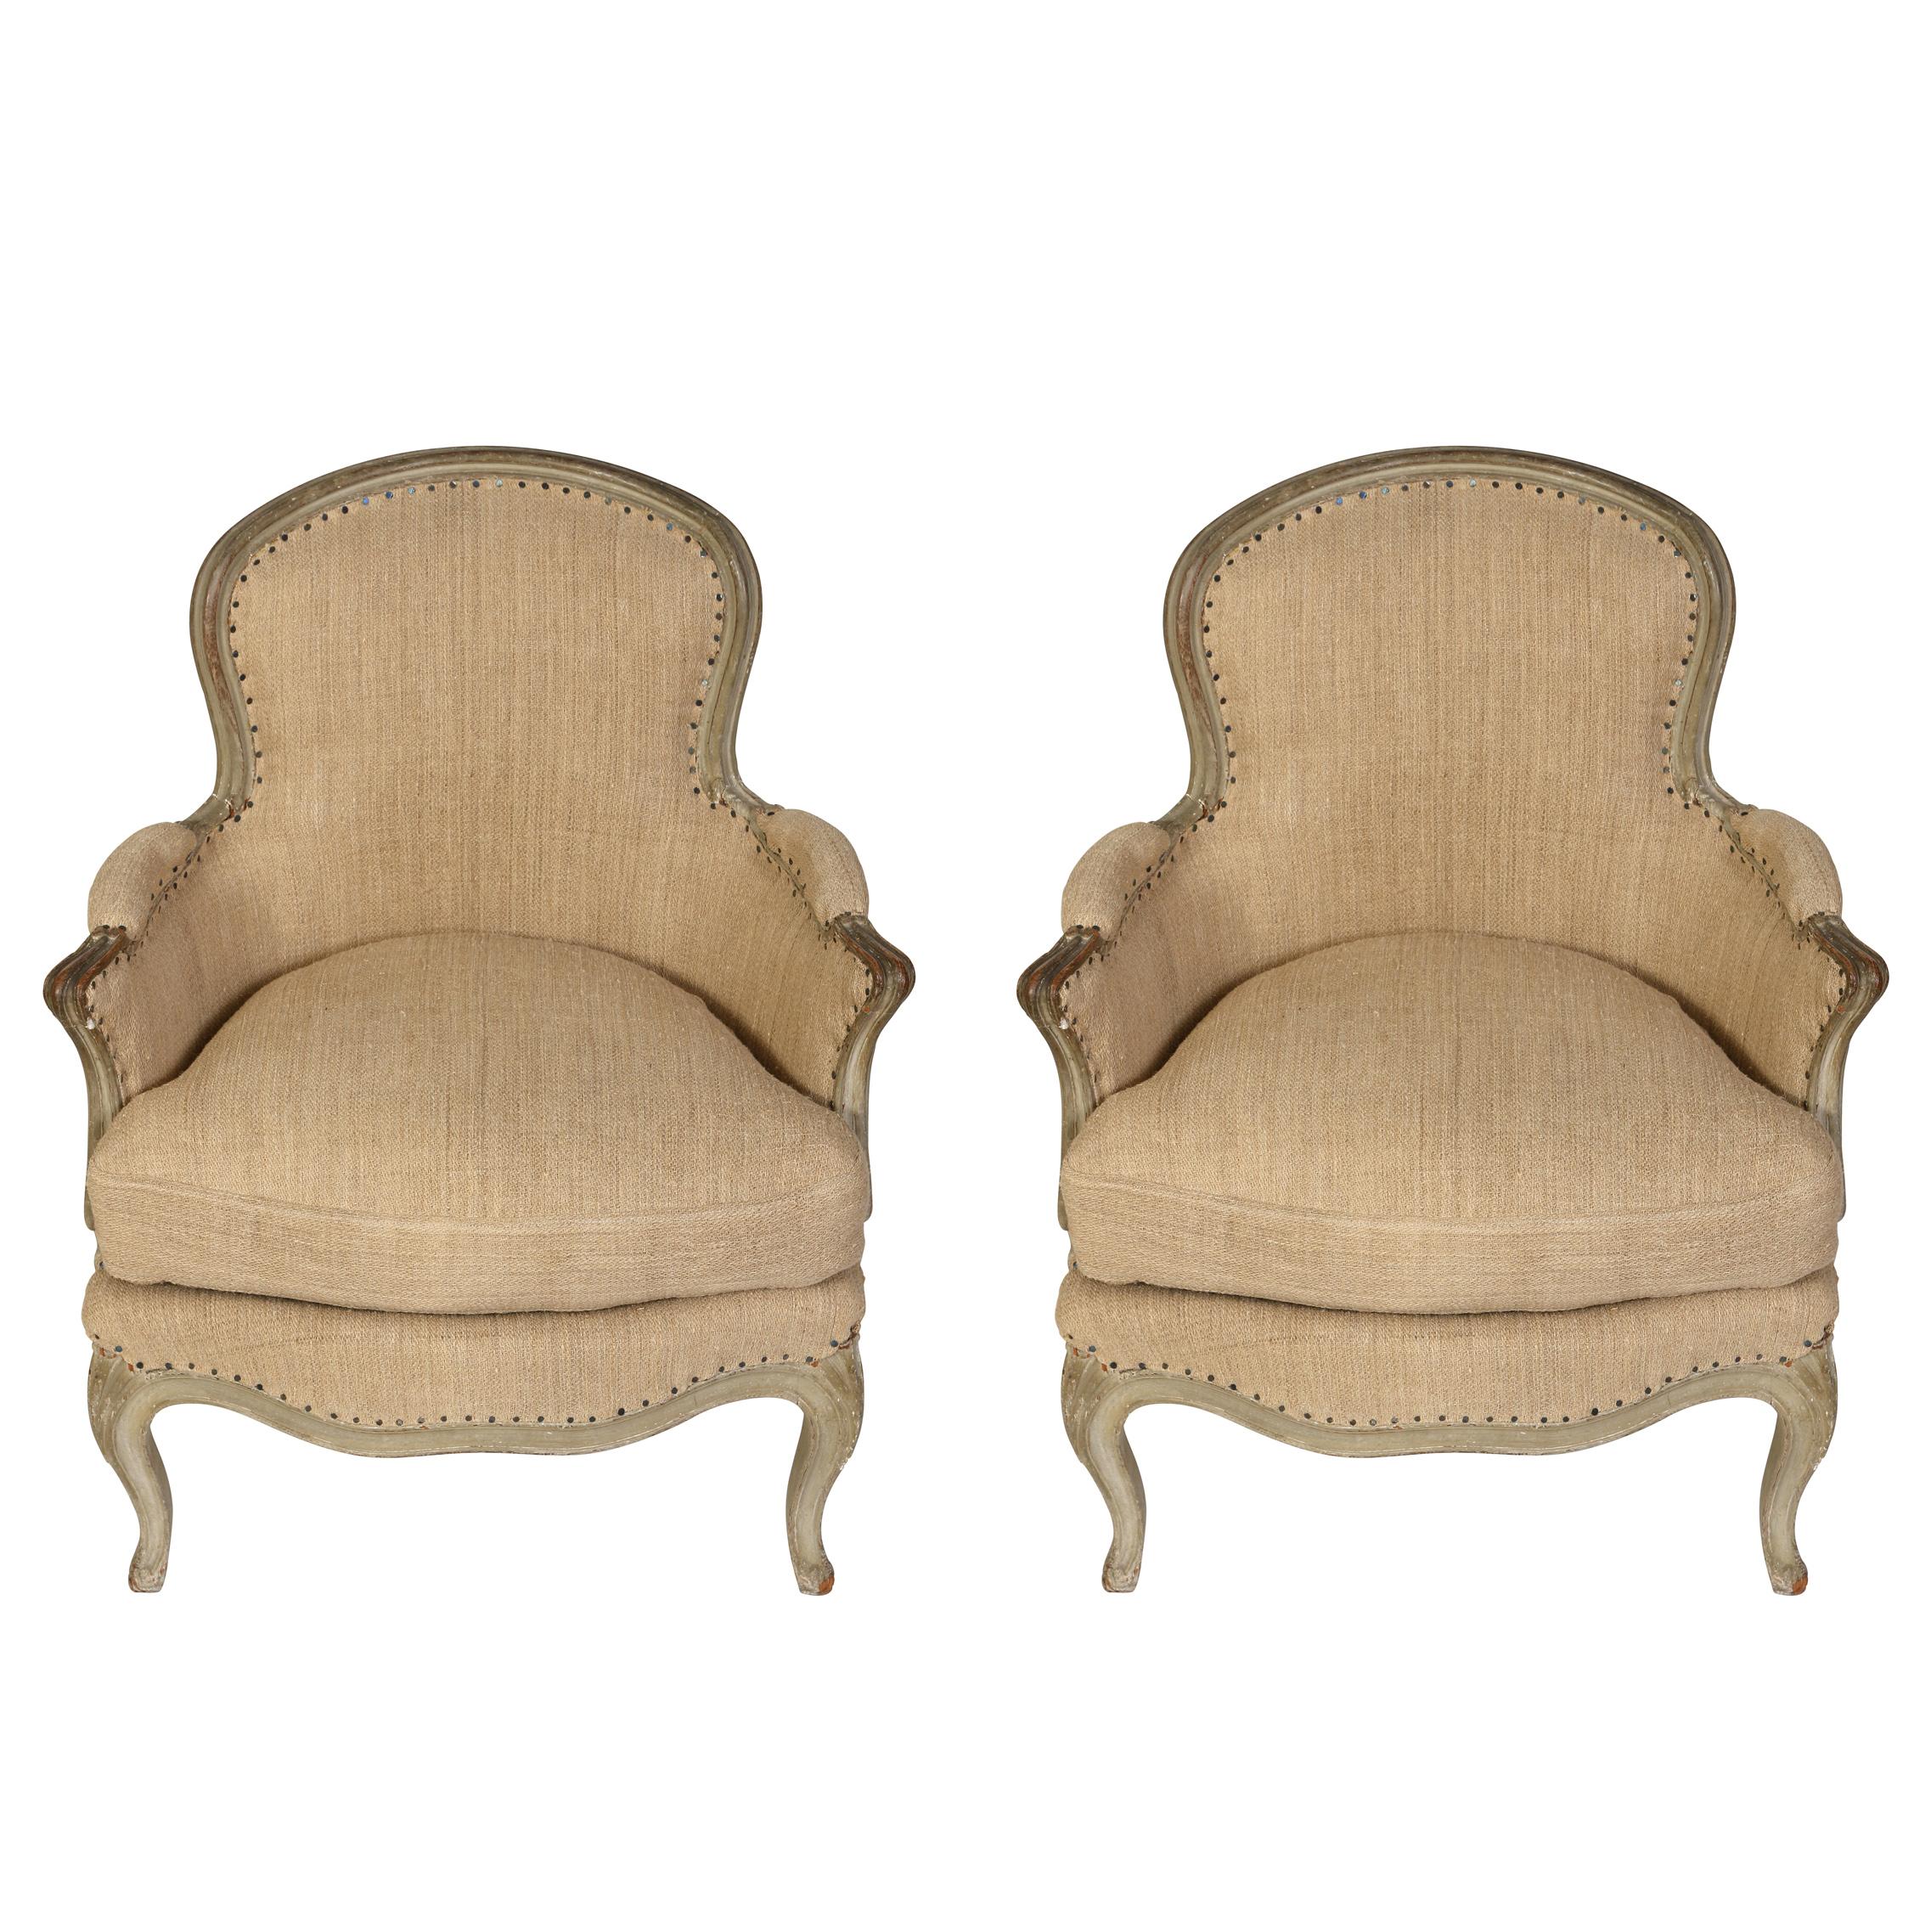 A pair of charming Louis XV style bergères with tight back, loose seat cushion, covered in a Belgian linen.  The frames are painted in a washed gray finish that has developed a soft patina.  The curved apron and cabriole legs are characteristic of